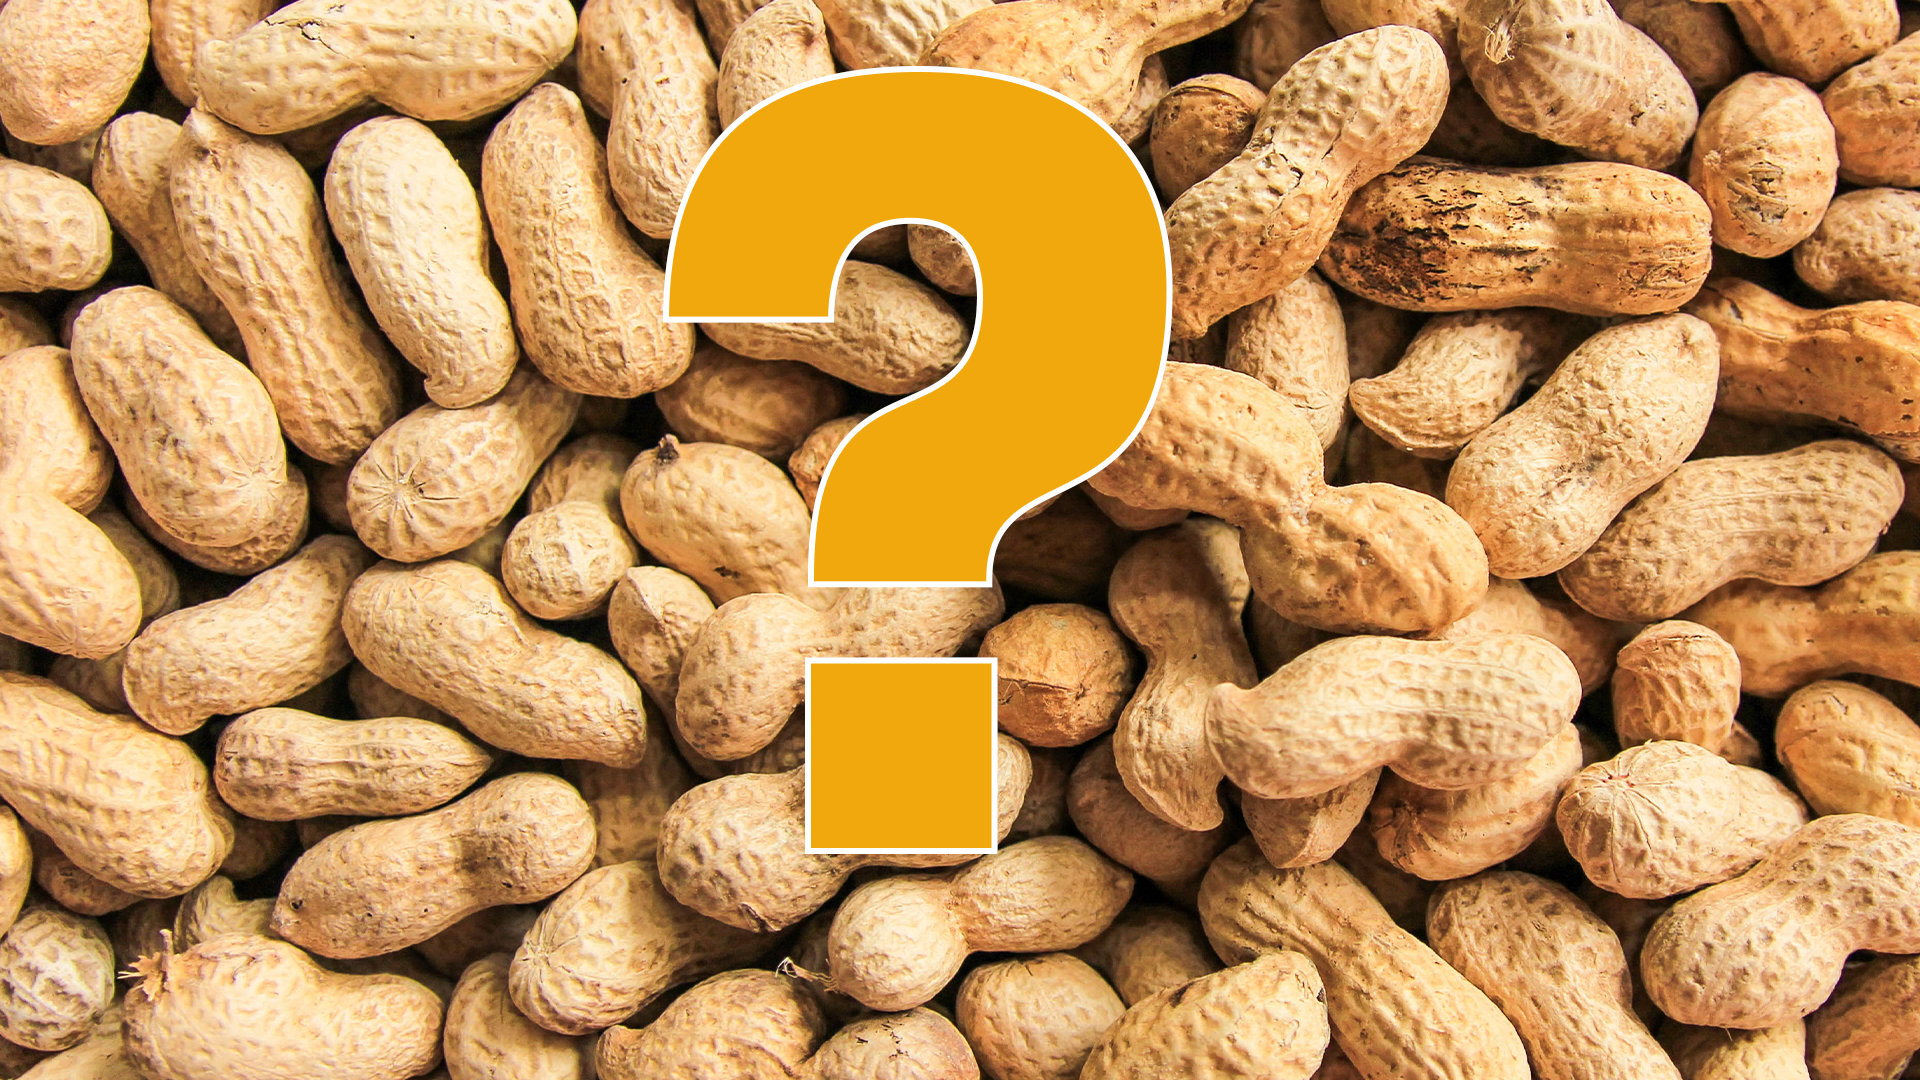 Nuts and question mark